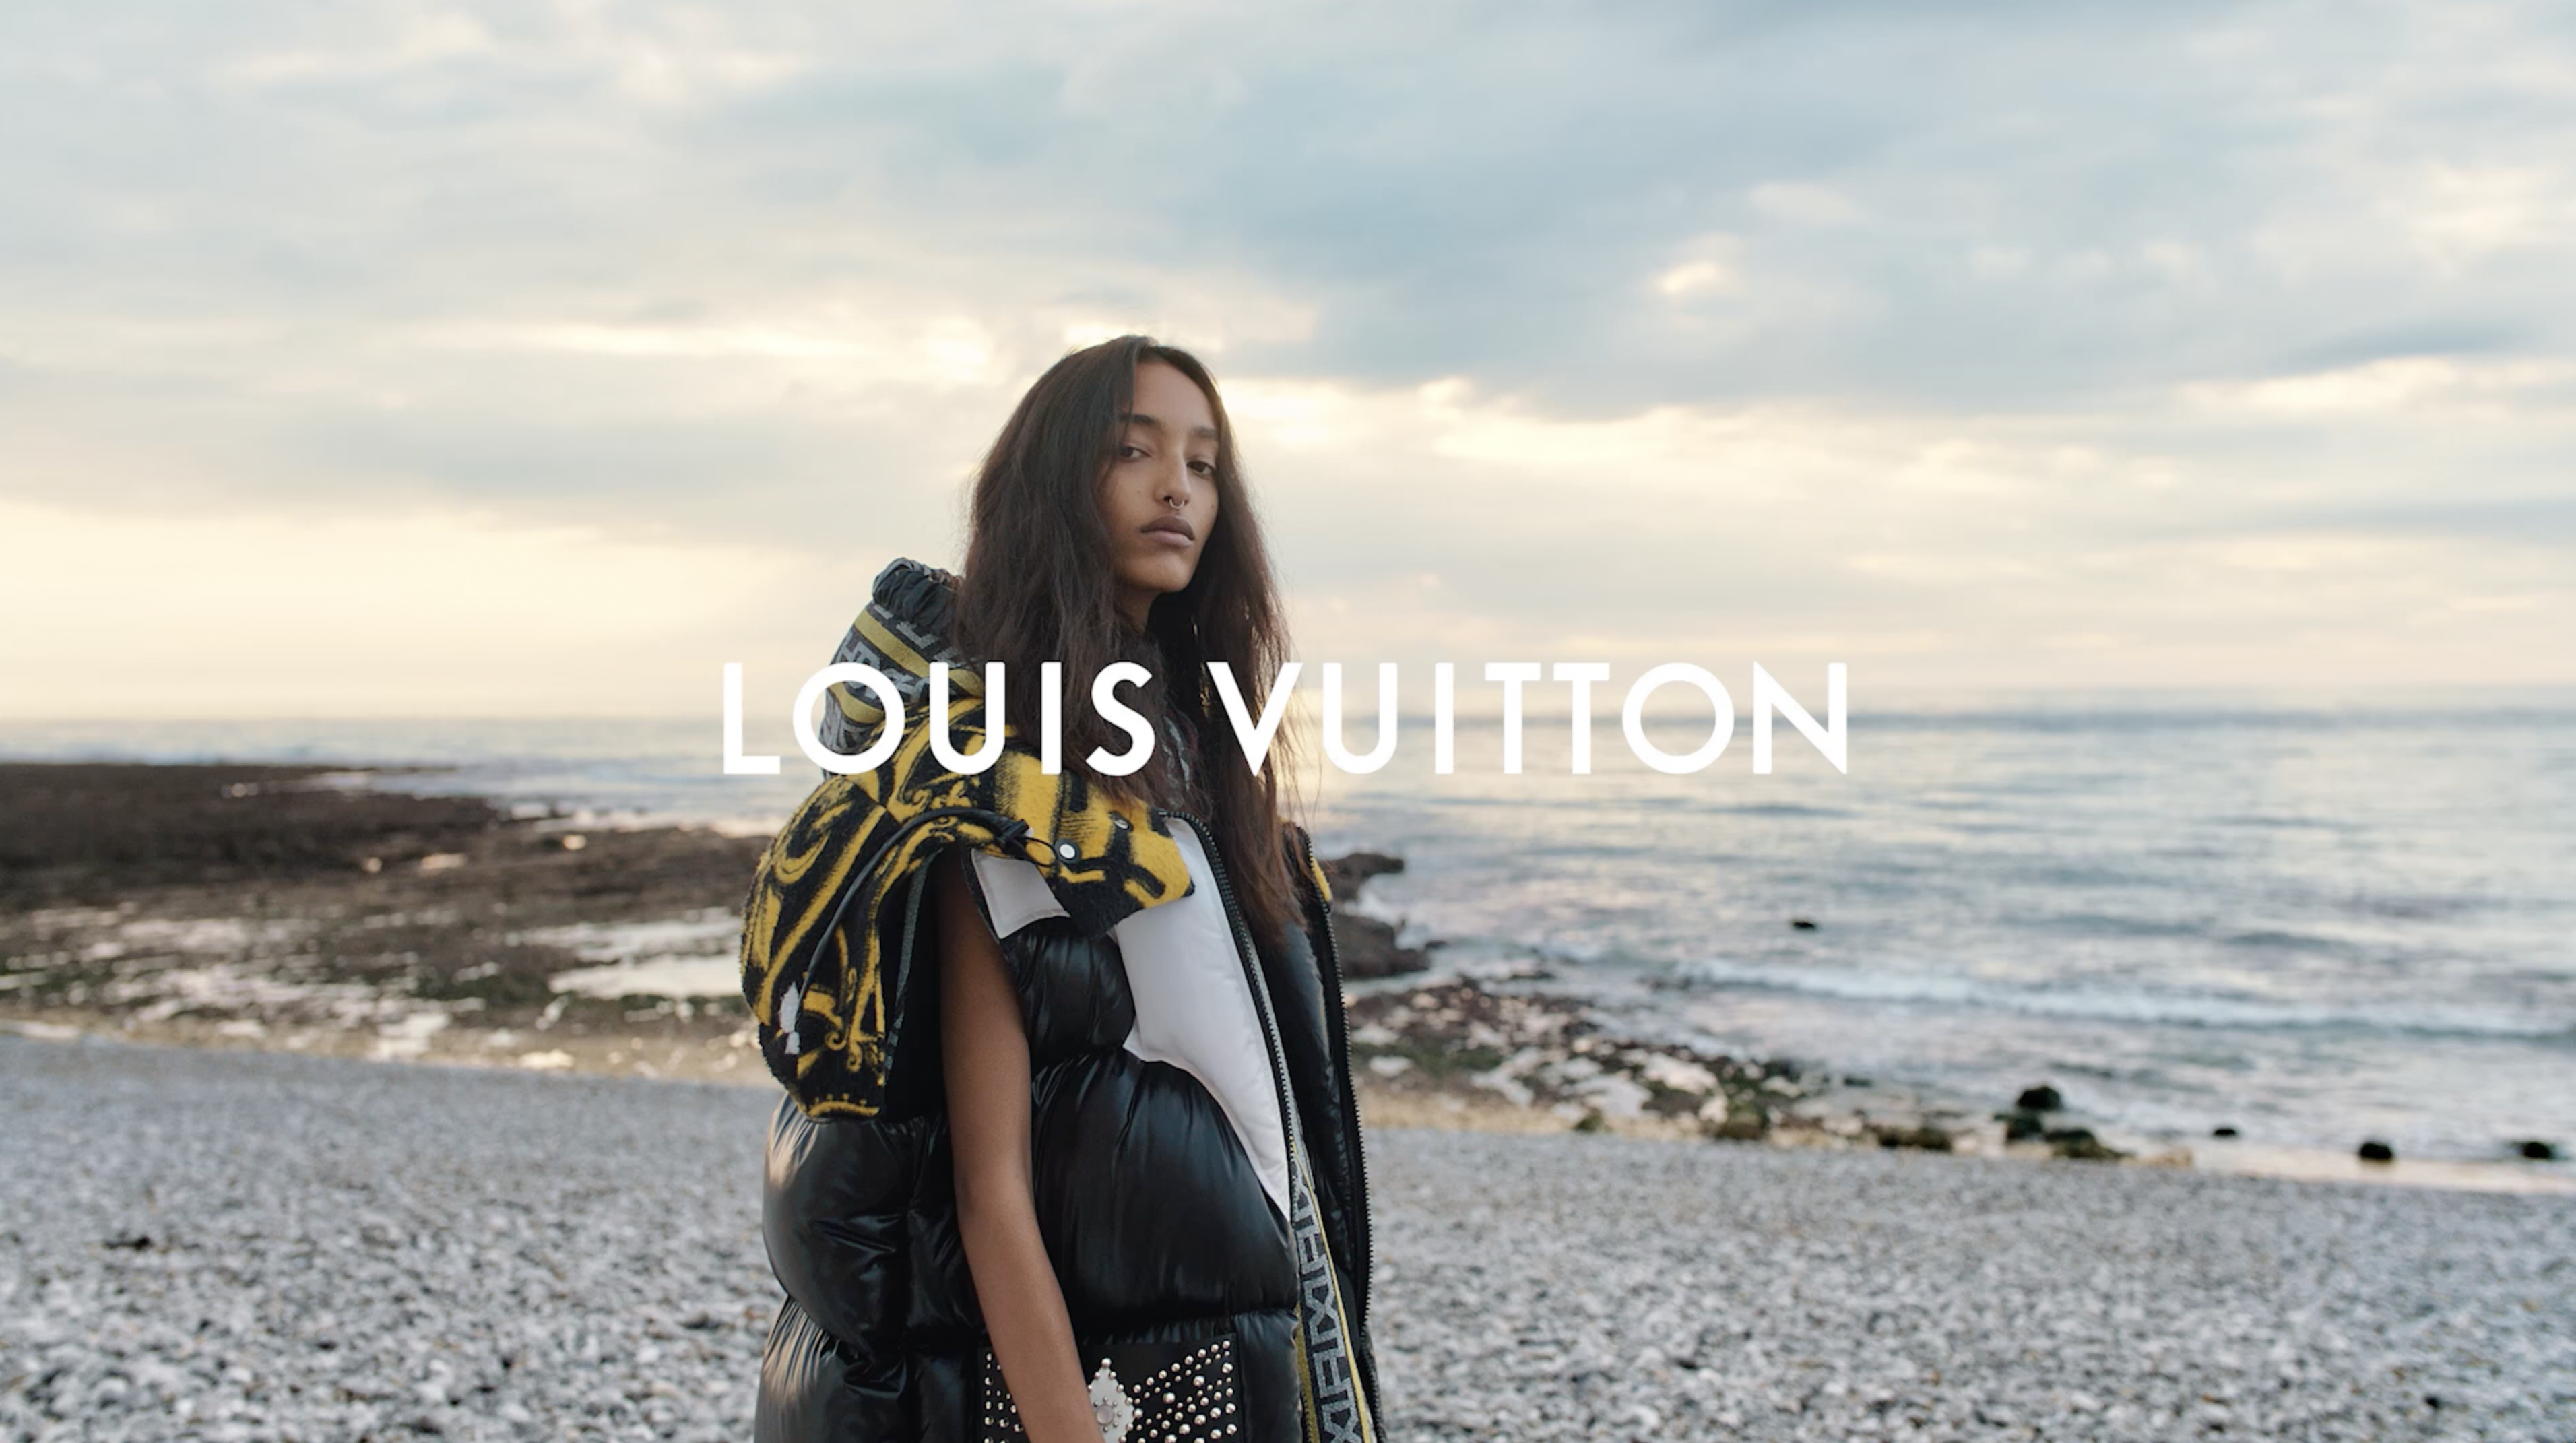 poster advertising Louis Vuitton handbag in paper magazine from